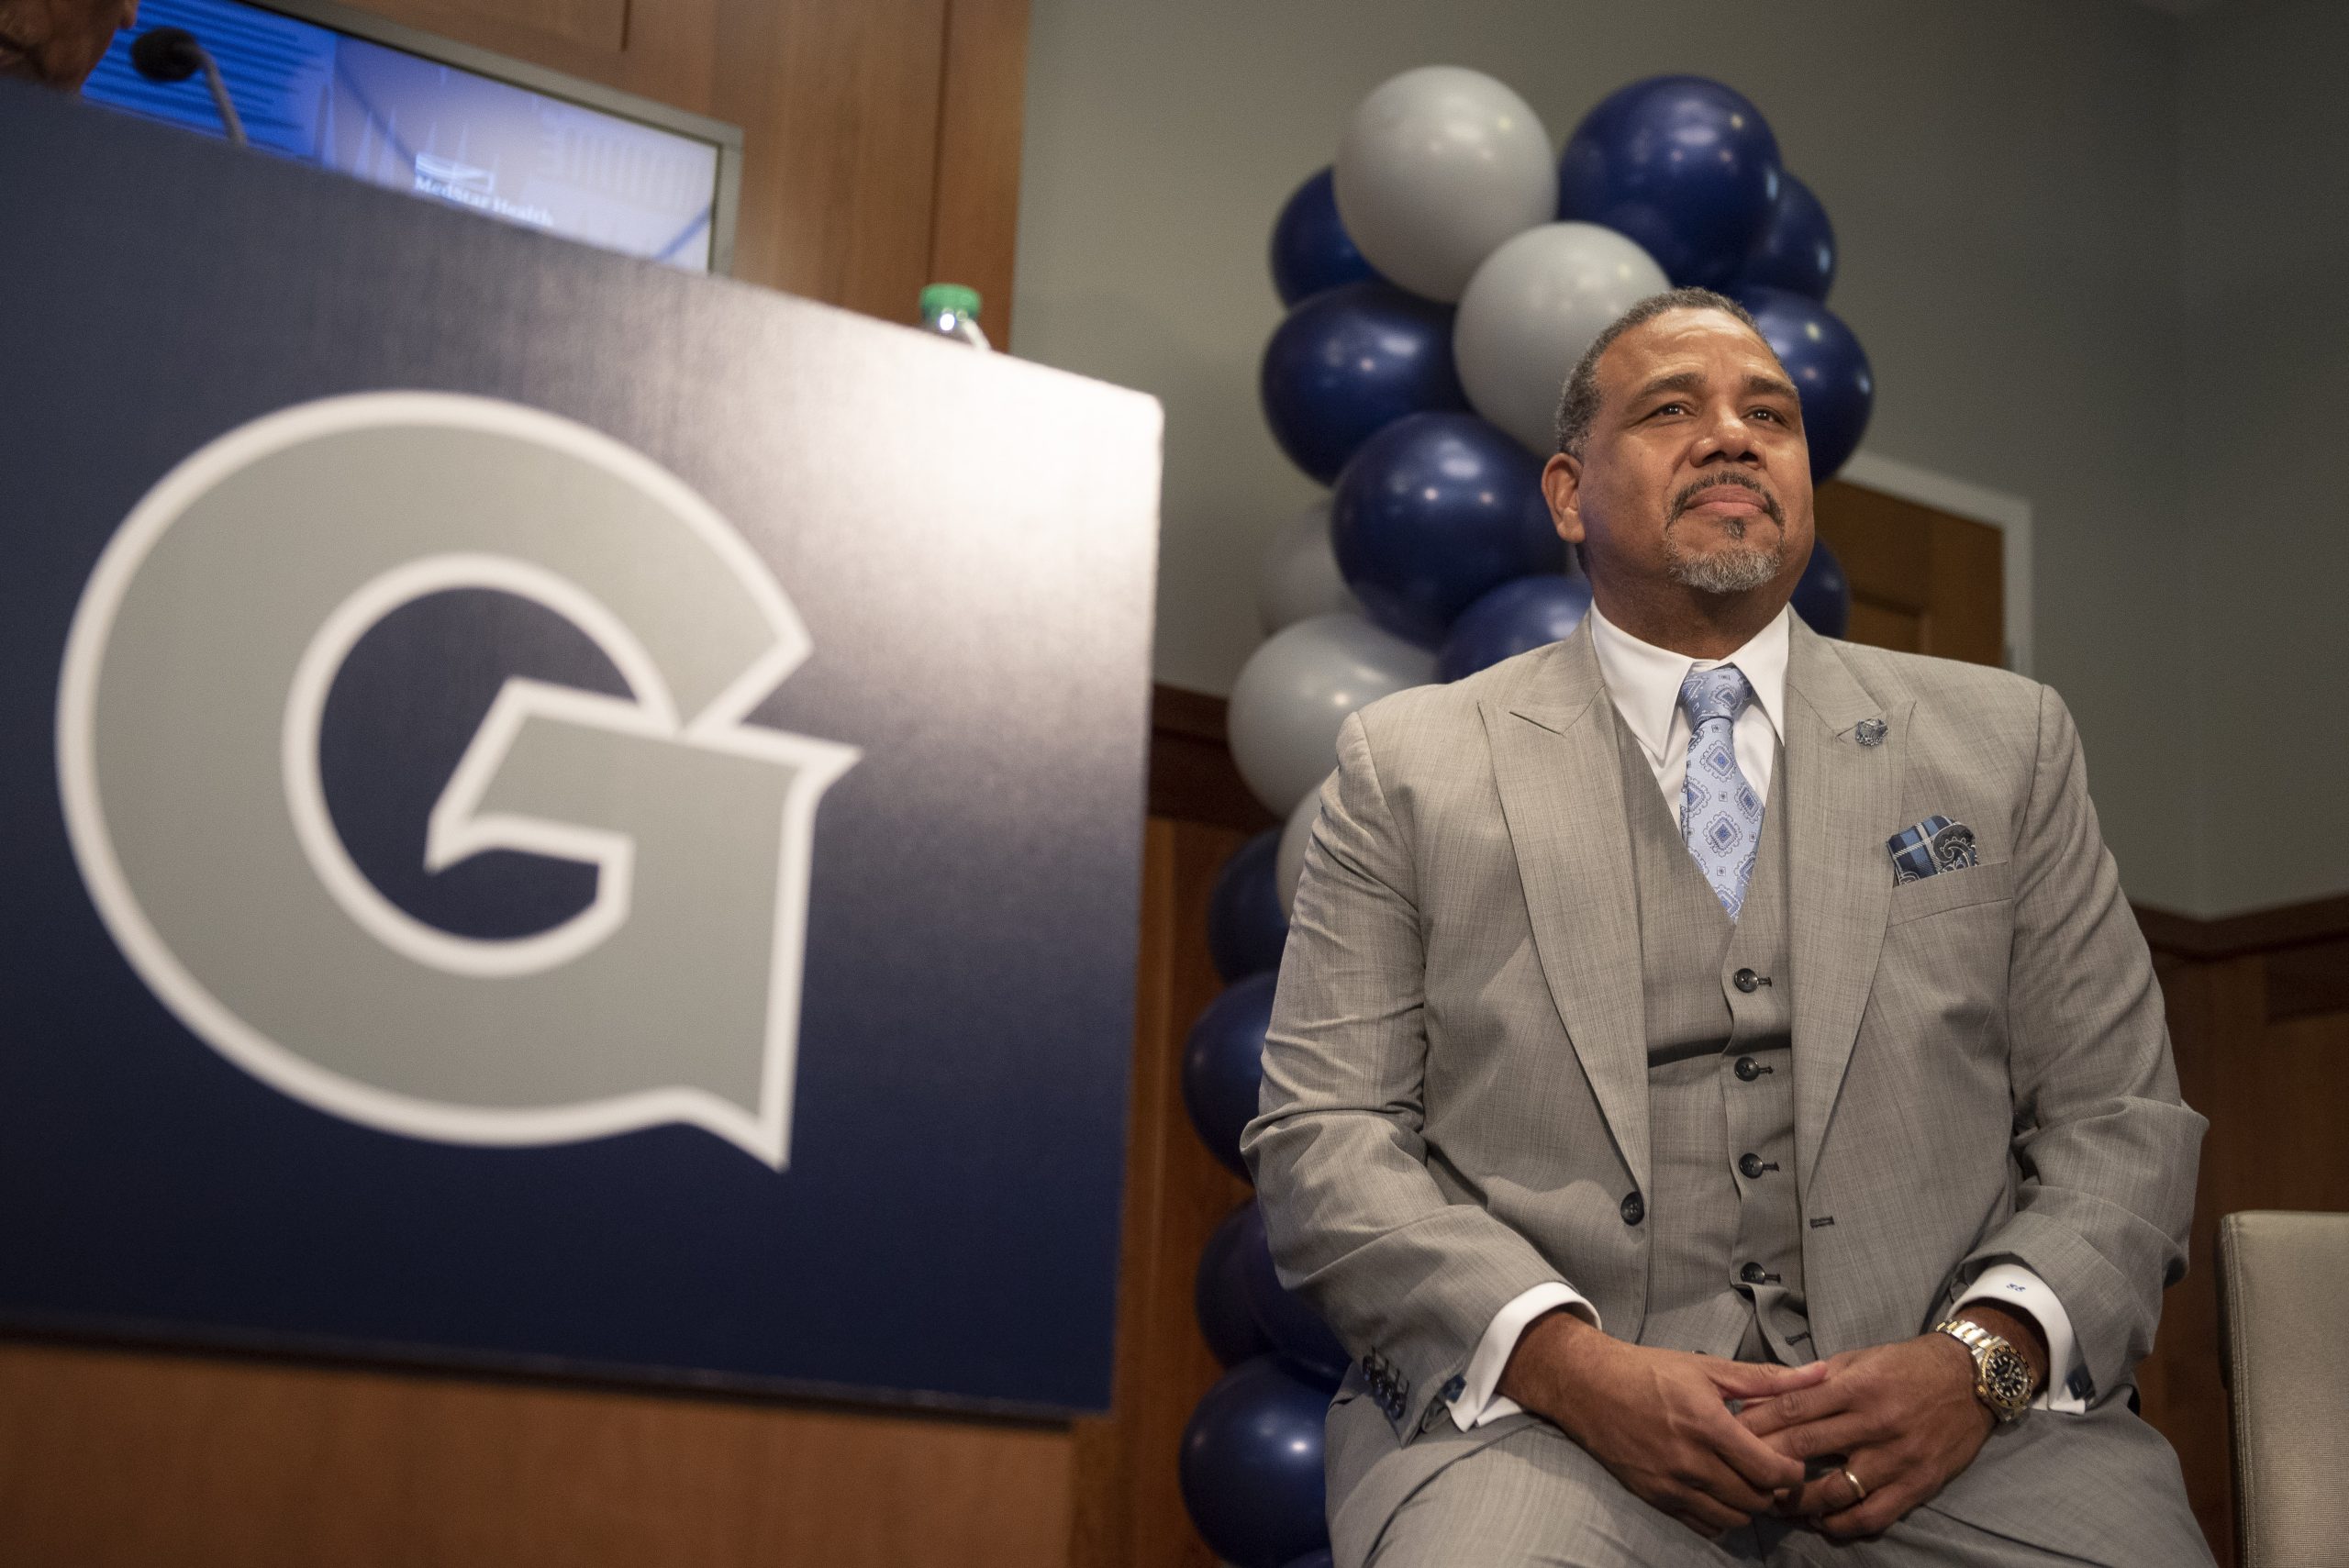 Georgetown Now: A Conversation with Georgetown President John J